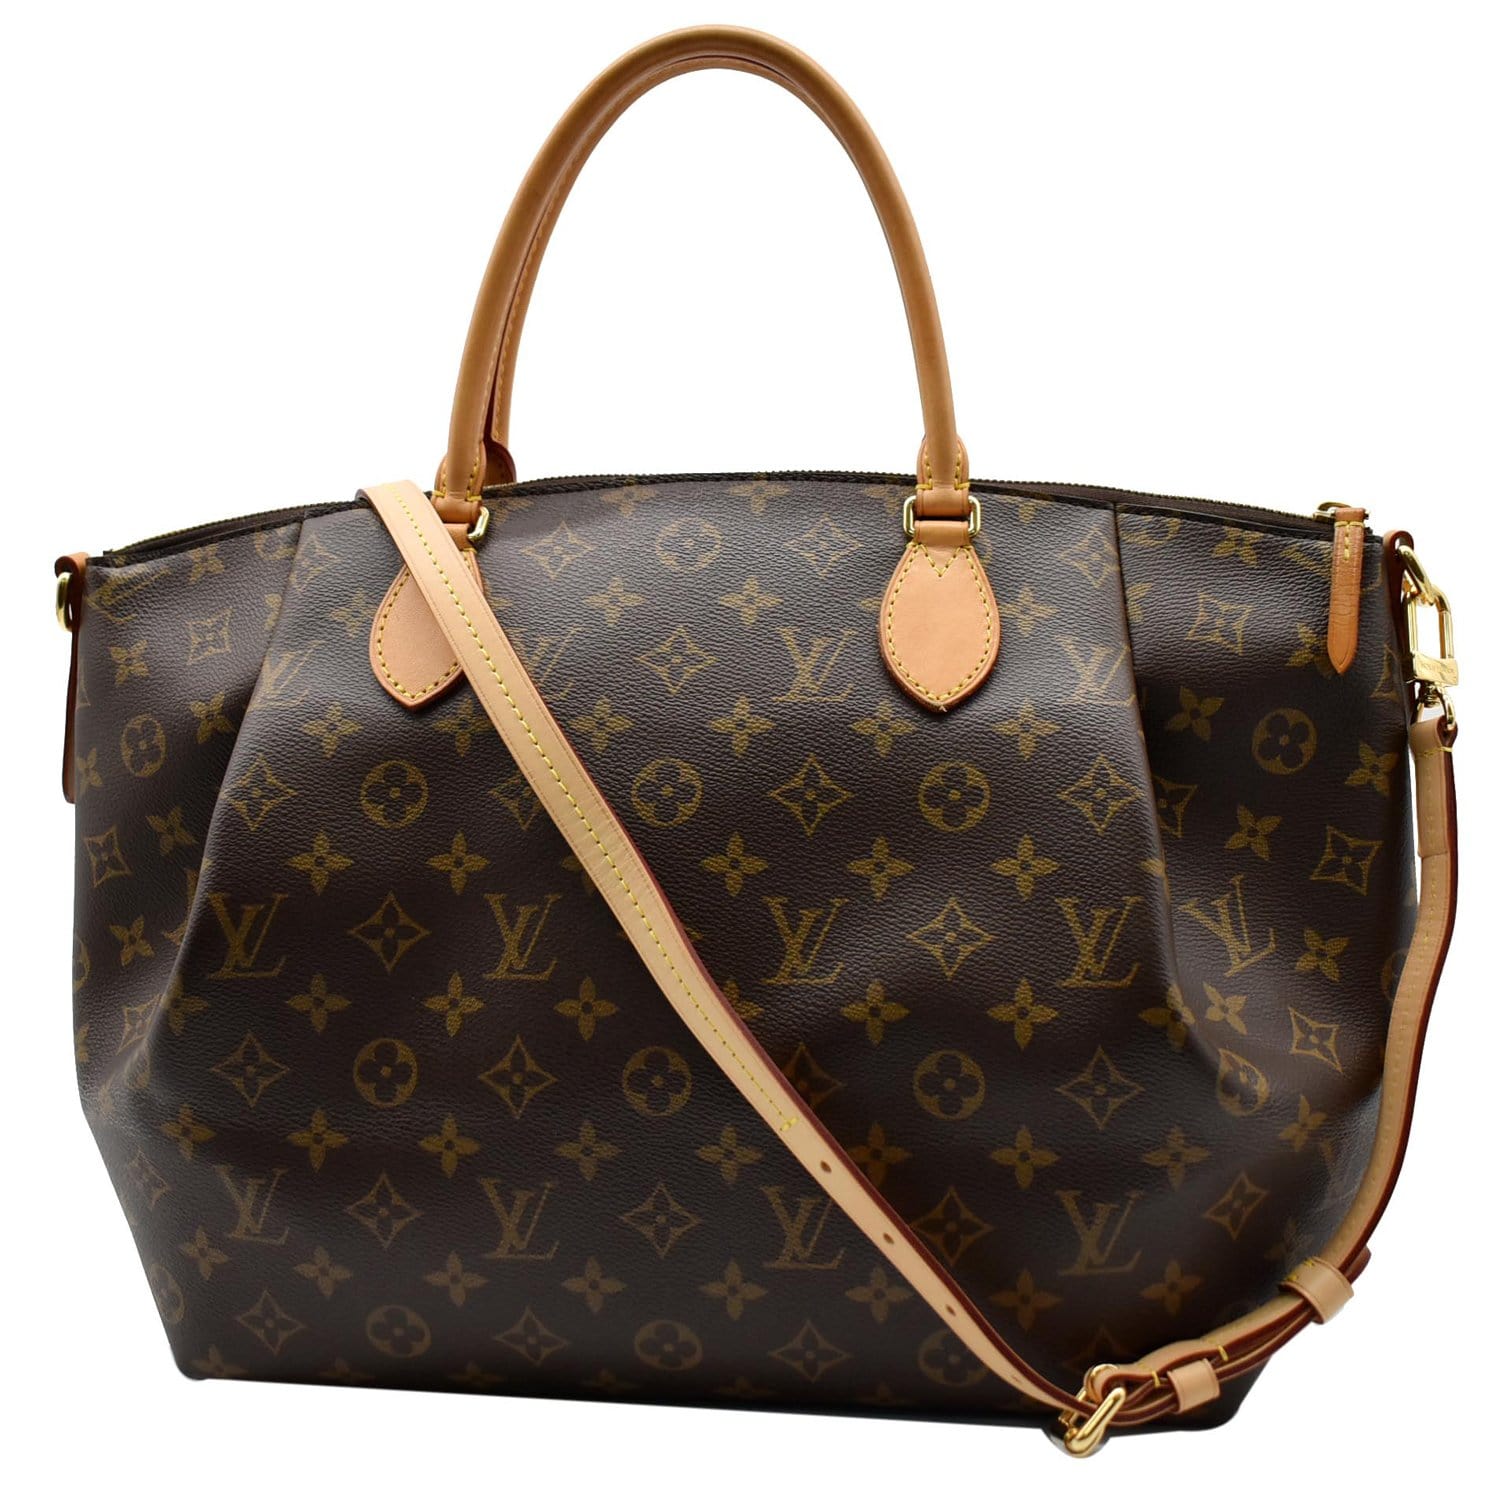 Louis Vuitton Change Tray Monogram Canvas and Leather Brown 1161576